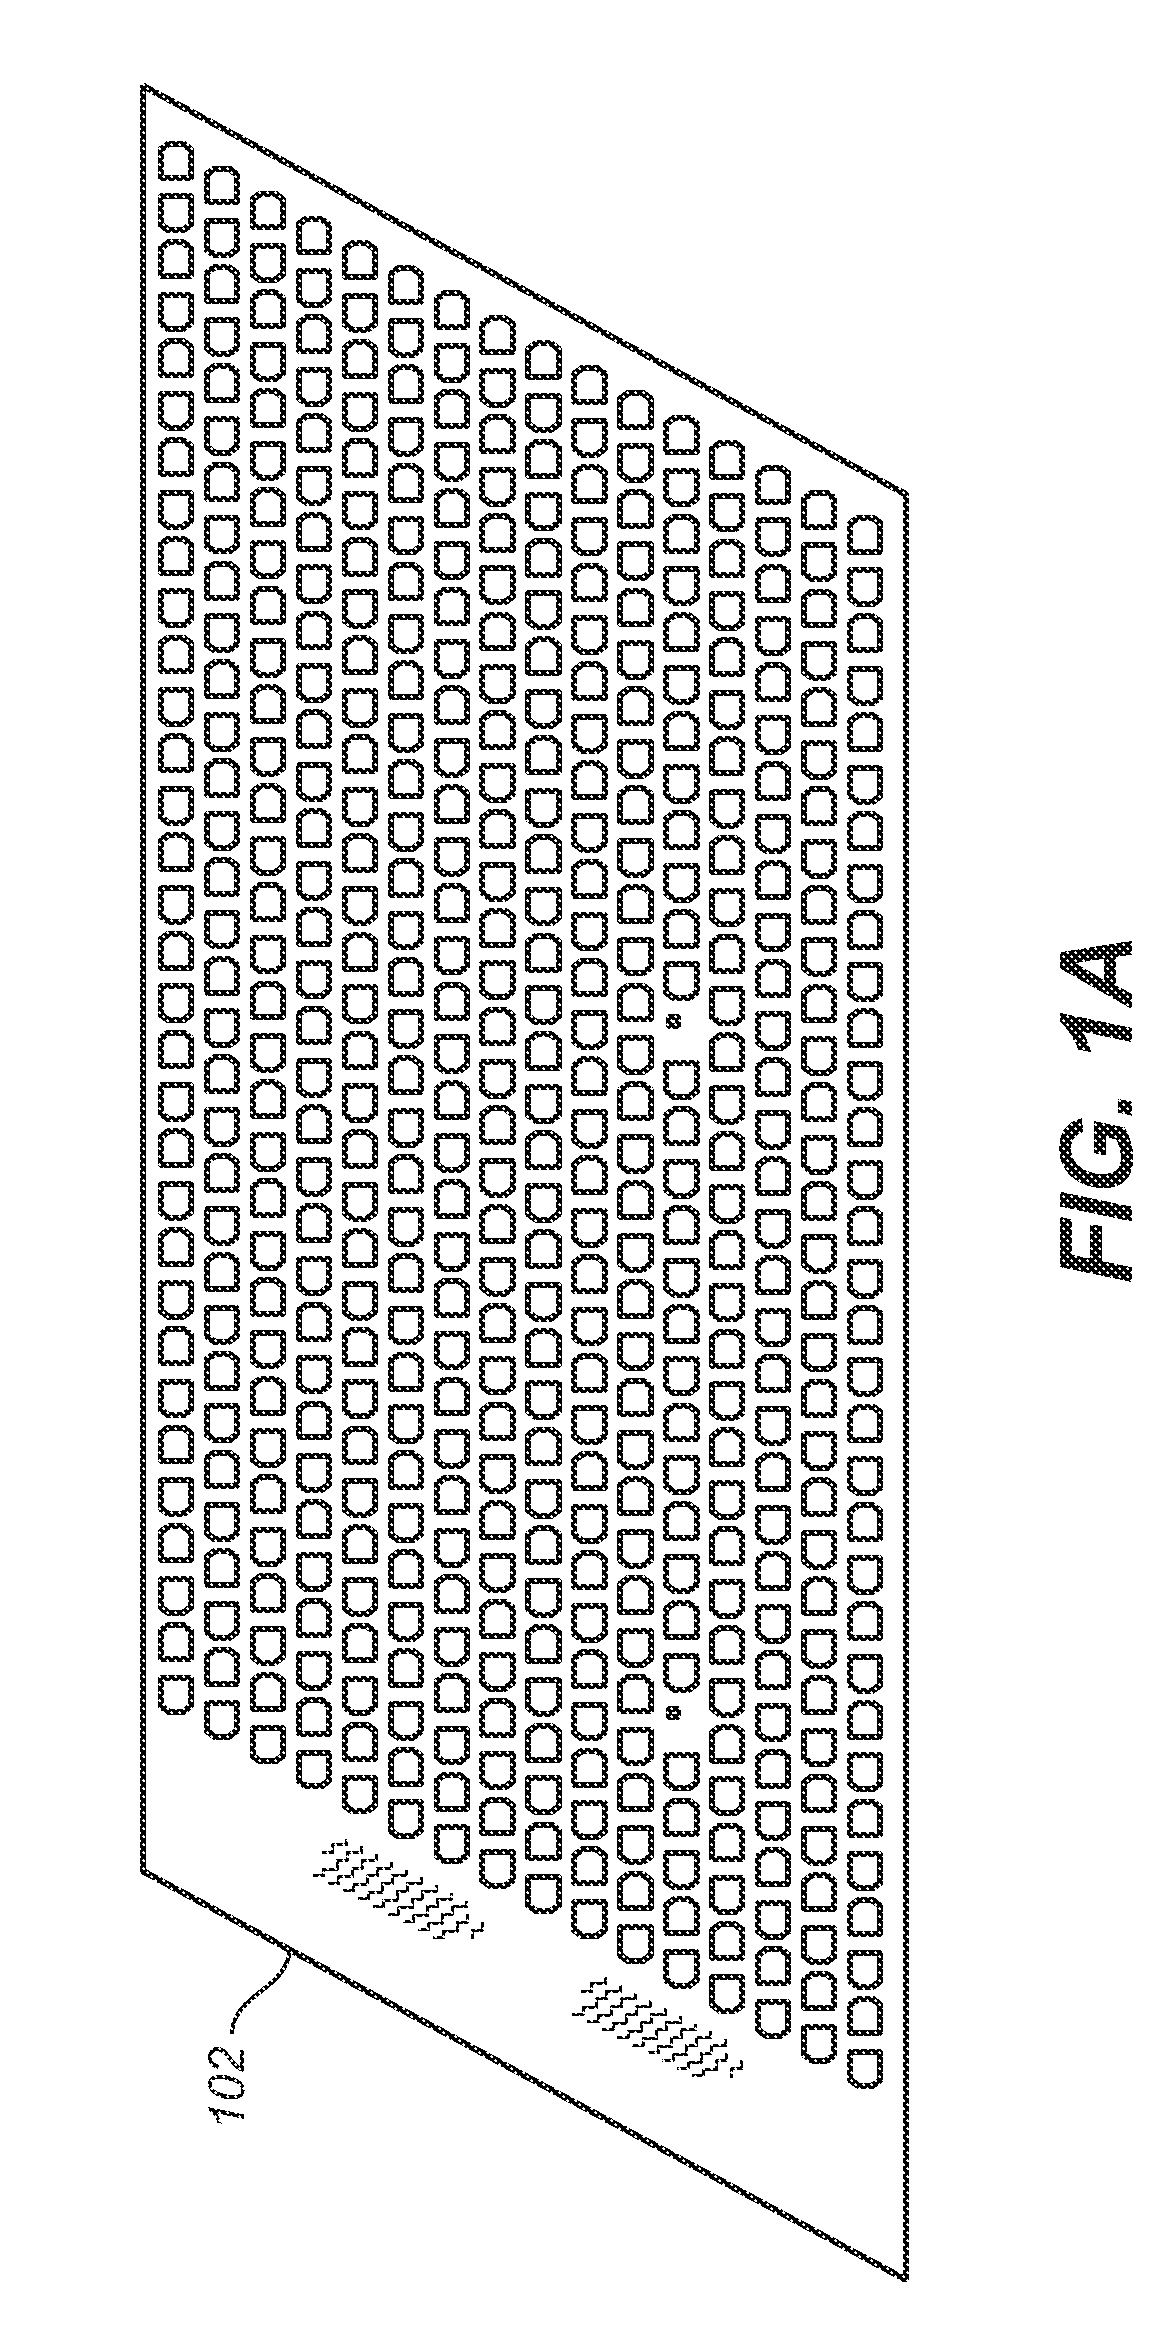 Radio frequency (RF) transition design for a phased array antenna system utilizing a beam forming network